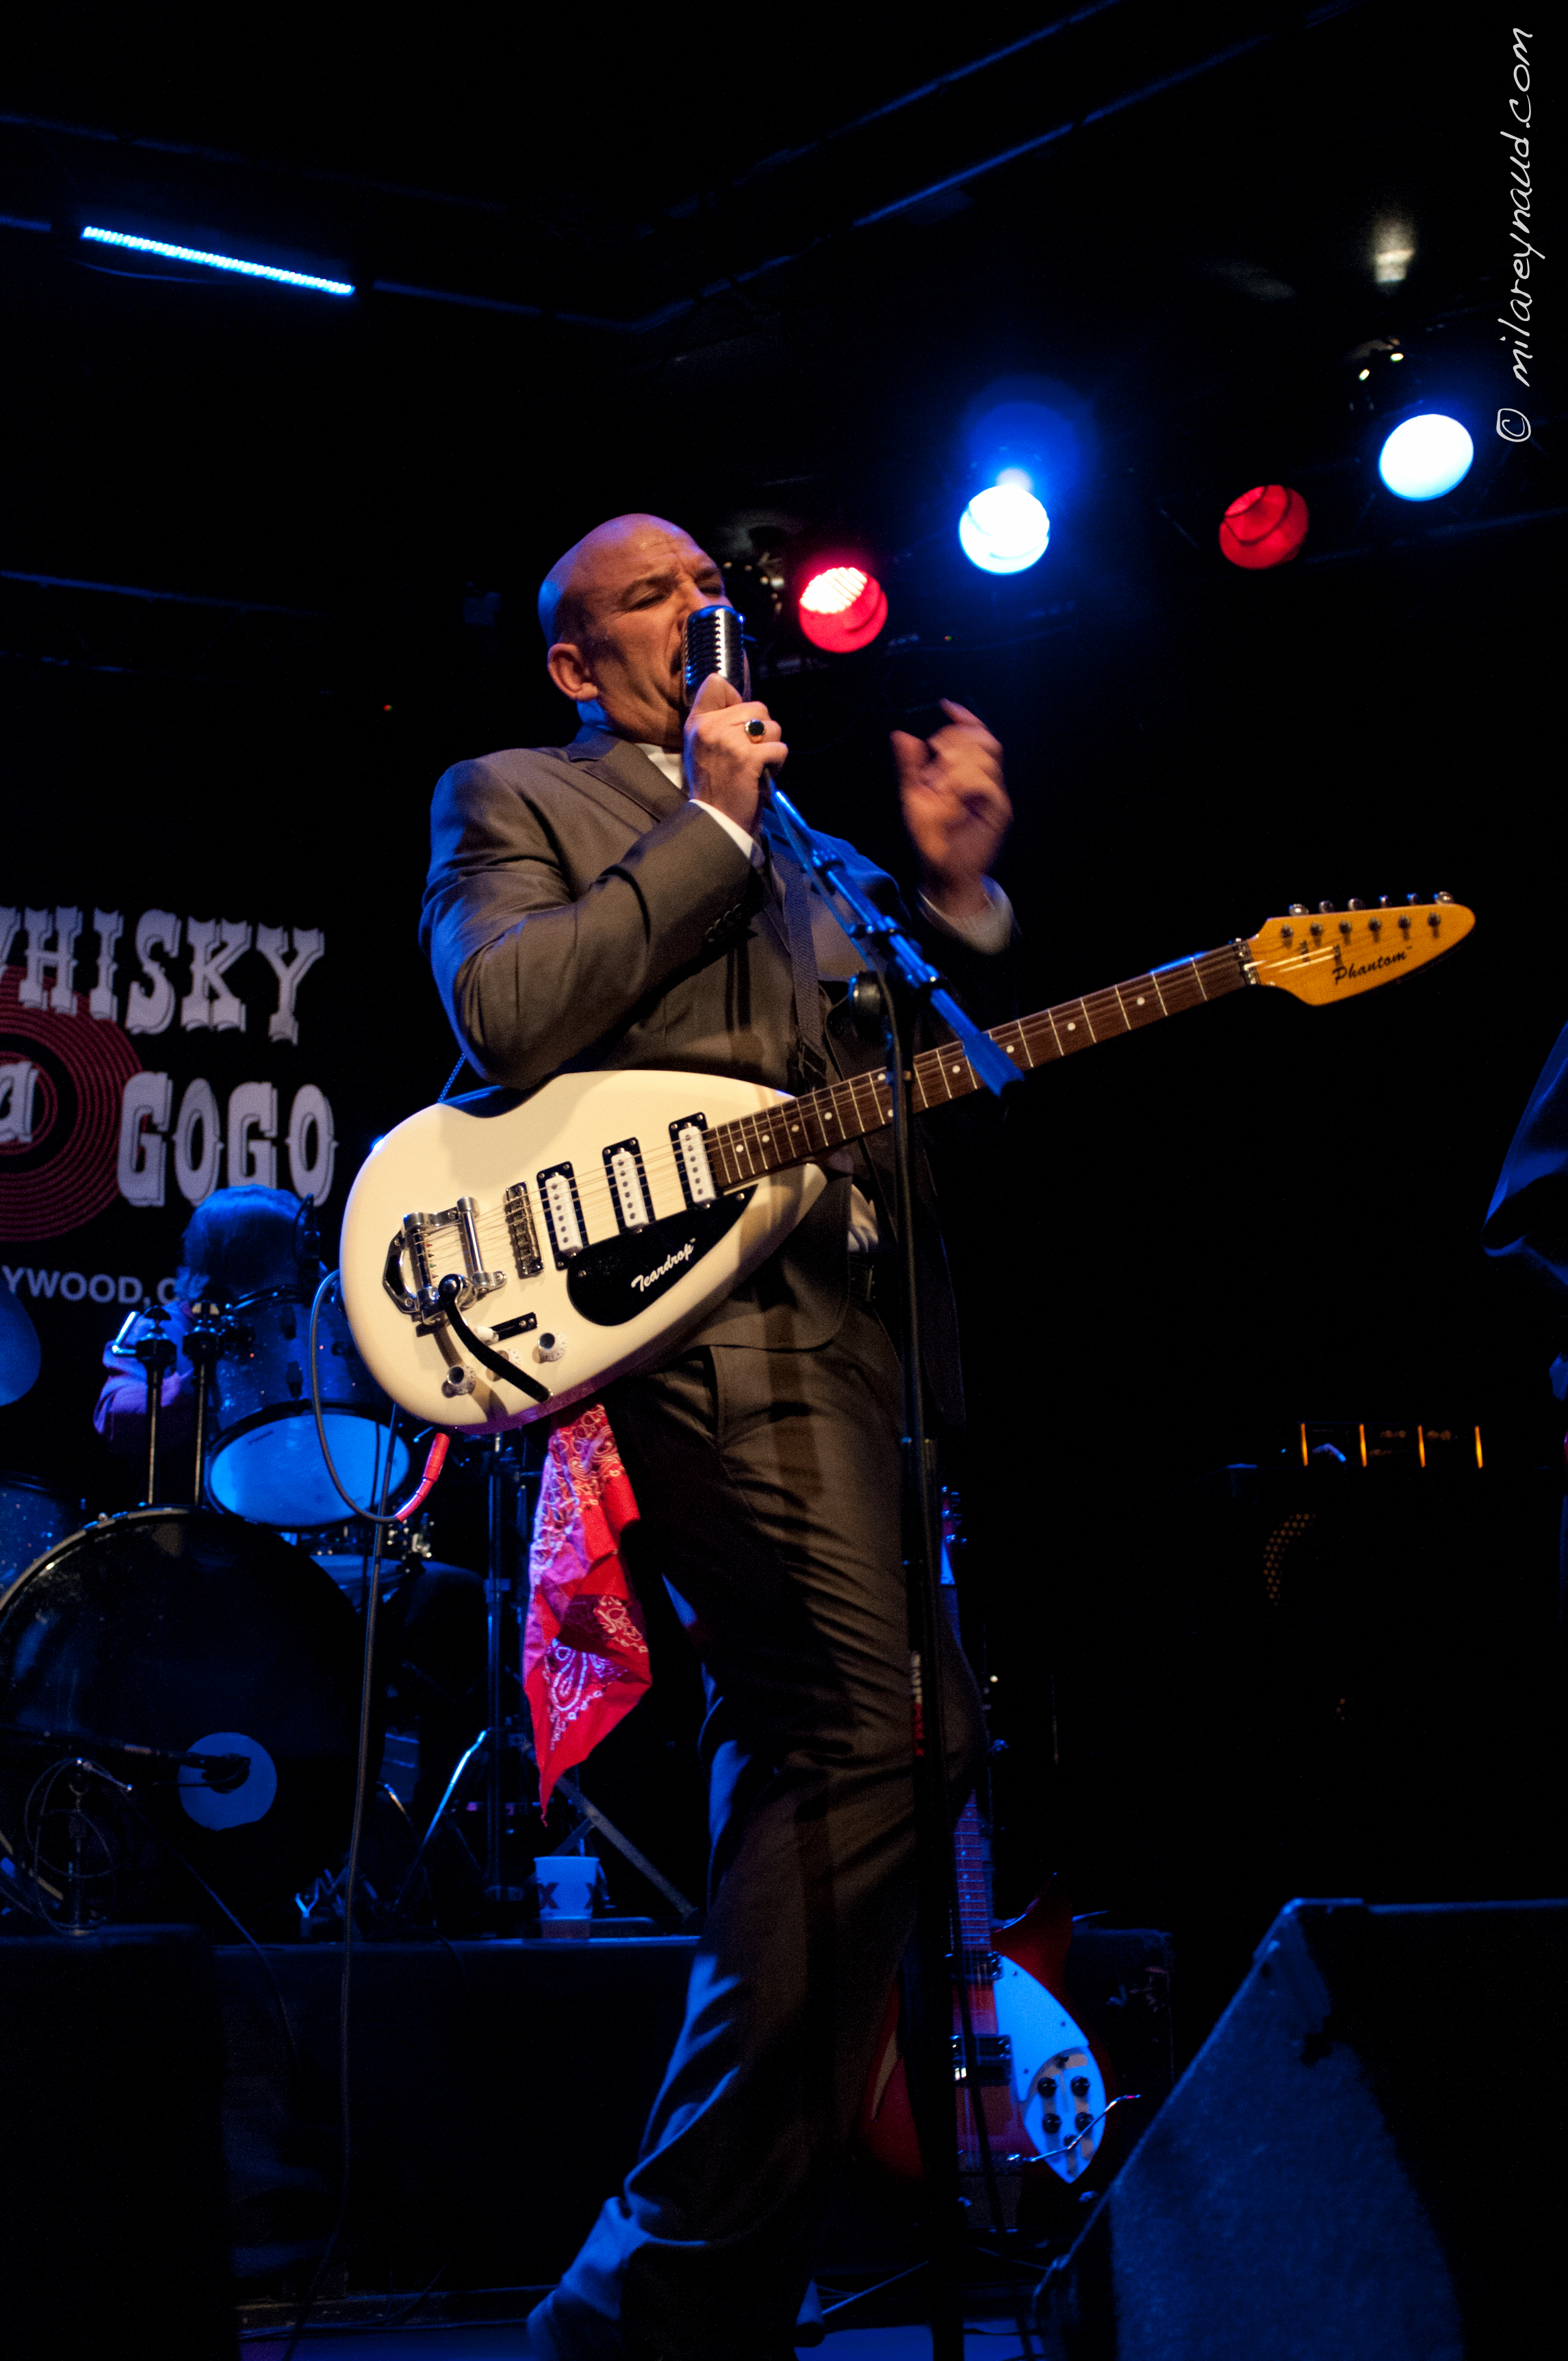 Sammy Busby and his Phantom Teardrop guitar with Dixie's Deceivers at The Whisky a Go Go in Hollywood, California.